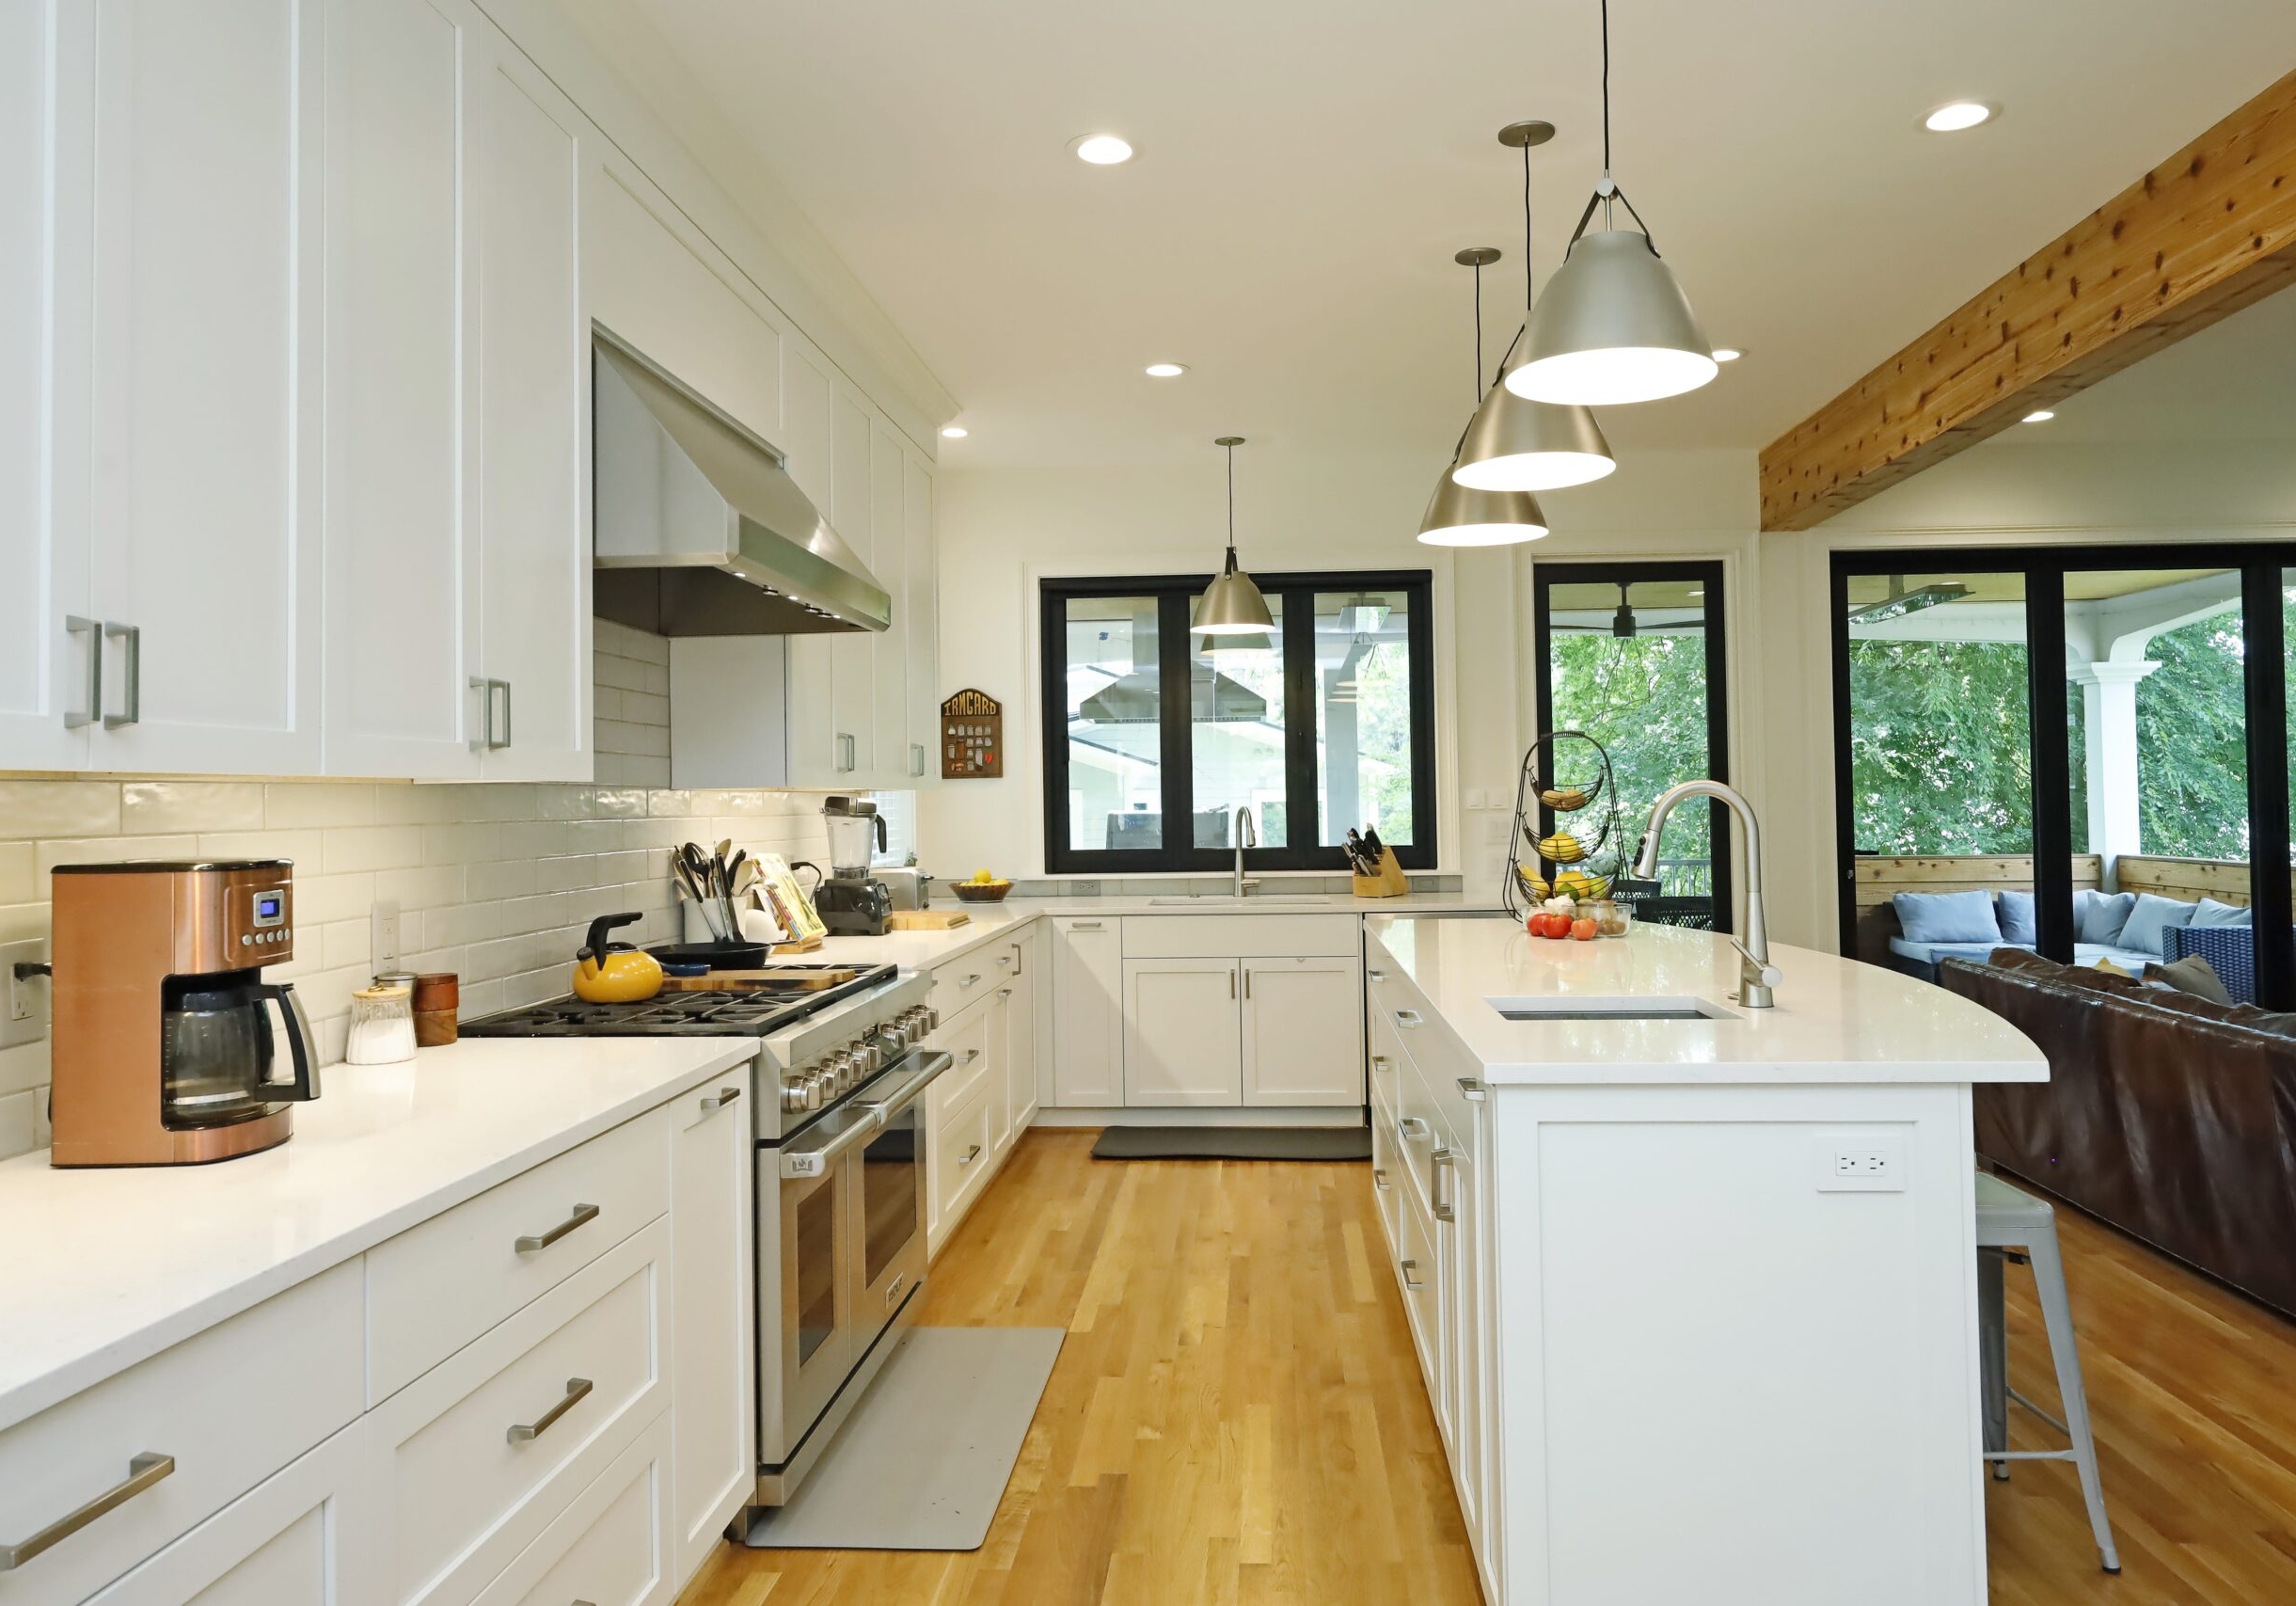 A view through the kitchen towards the covered deck highlights the generous kitchen prep space, sleek white counters and cabinets, and large accordions doors and windows onto the deck.